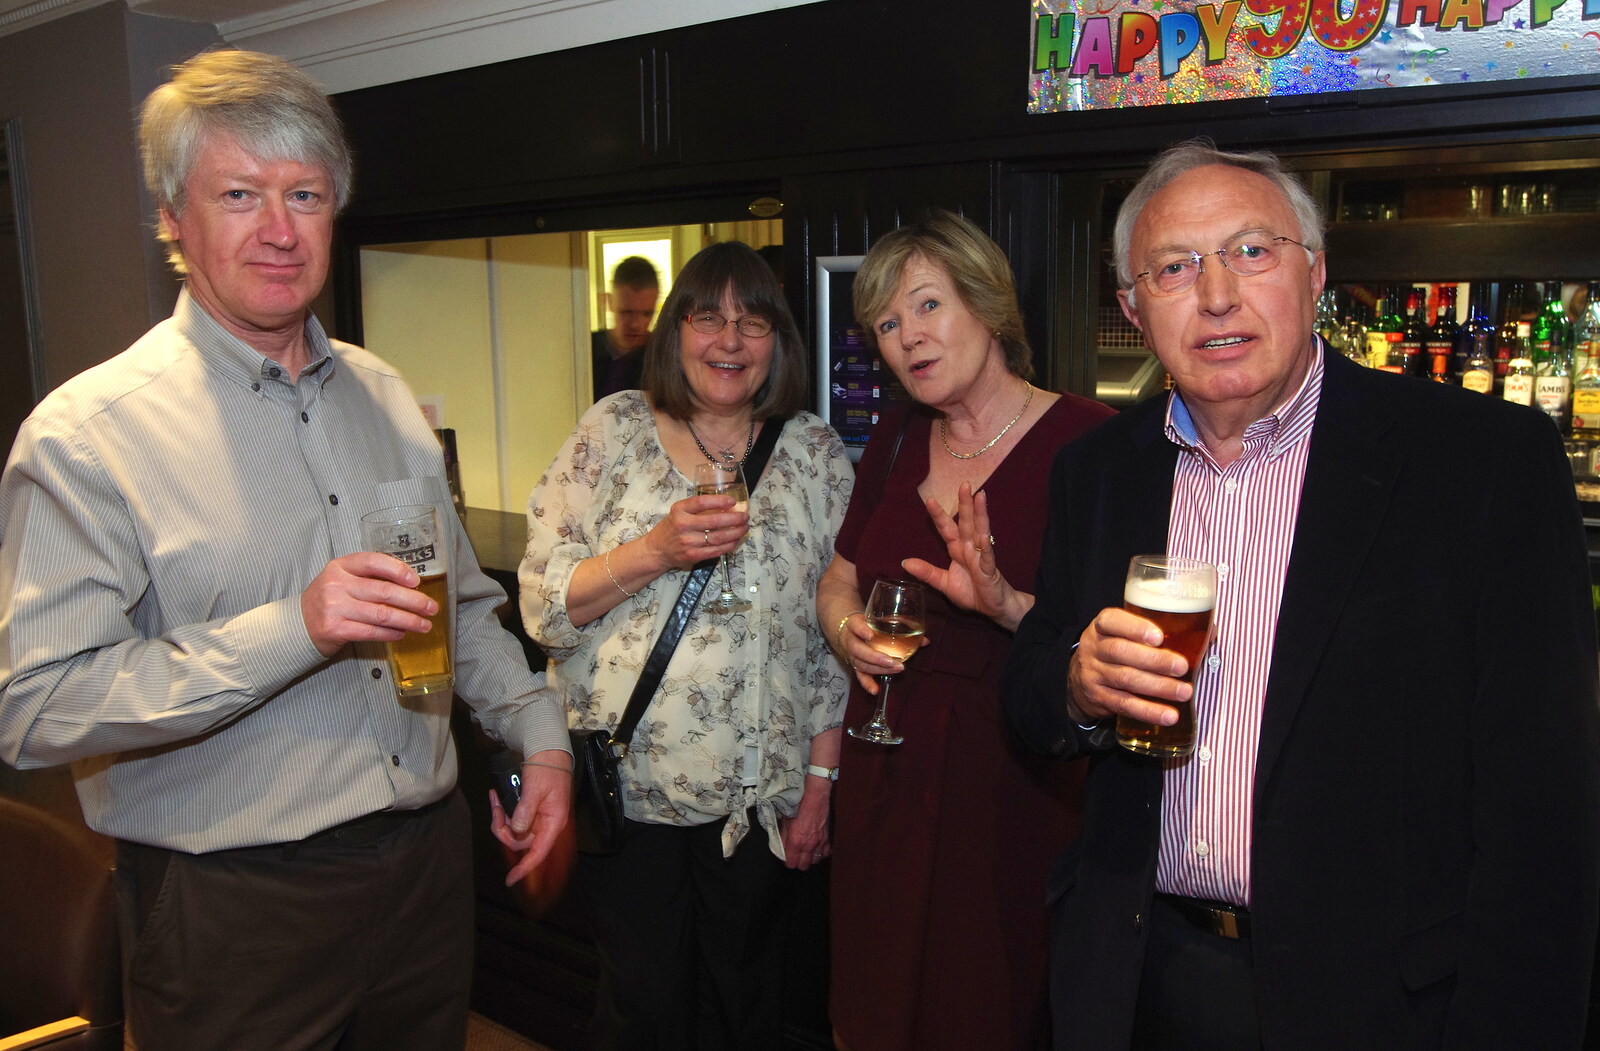 Neil, Caroline, Judith and Bruno from Uncle James's Ninetieth Birthday, Cheadle Hulme, Manchester - 20th April 2013